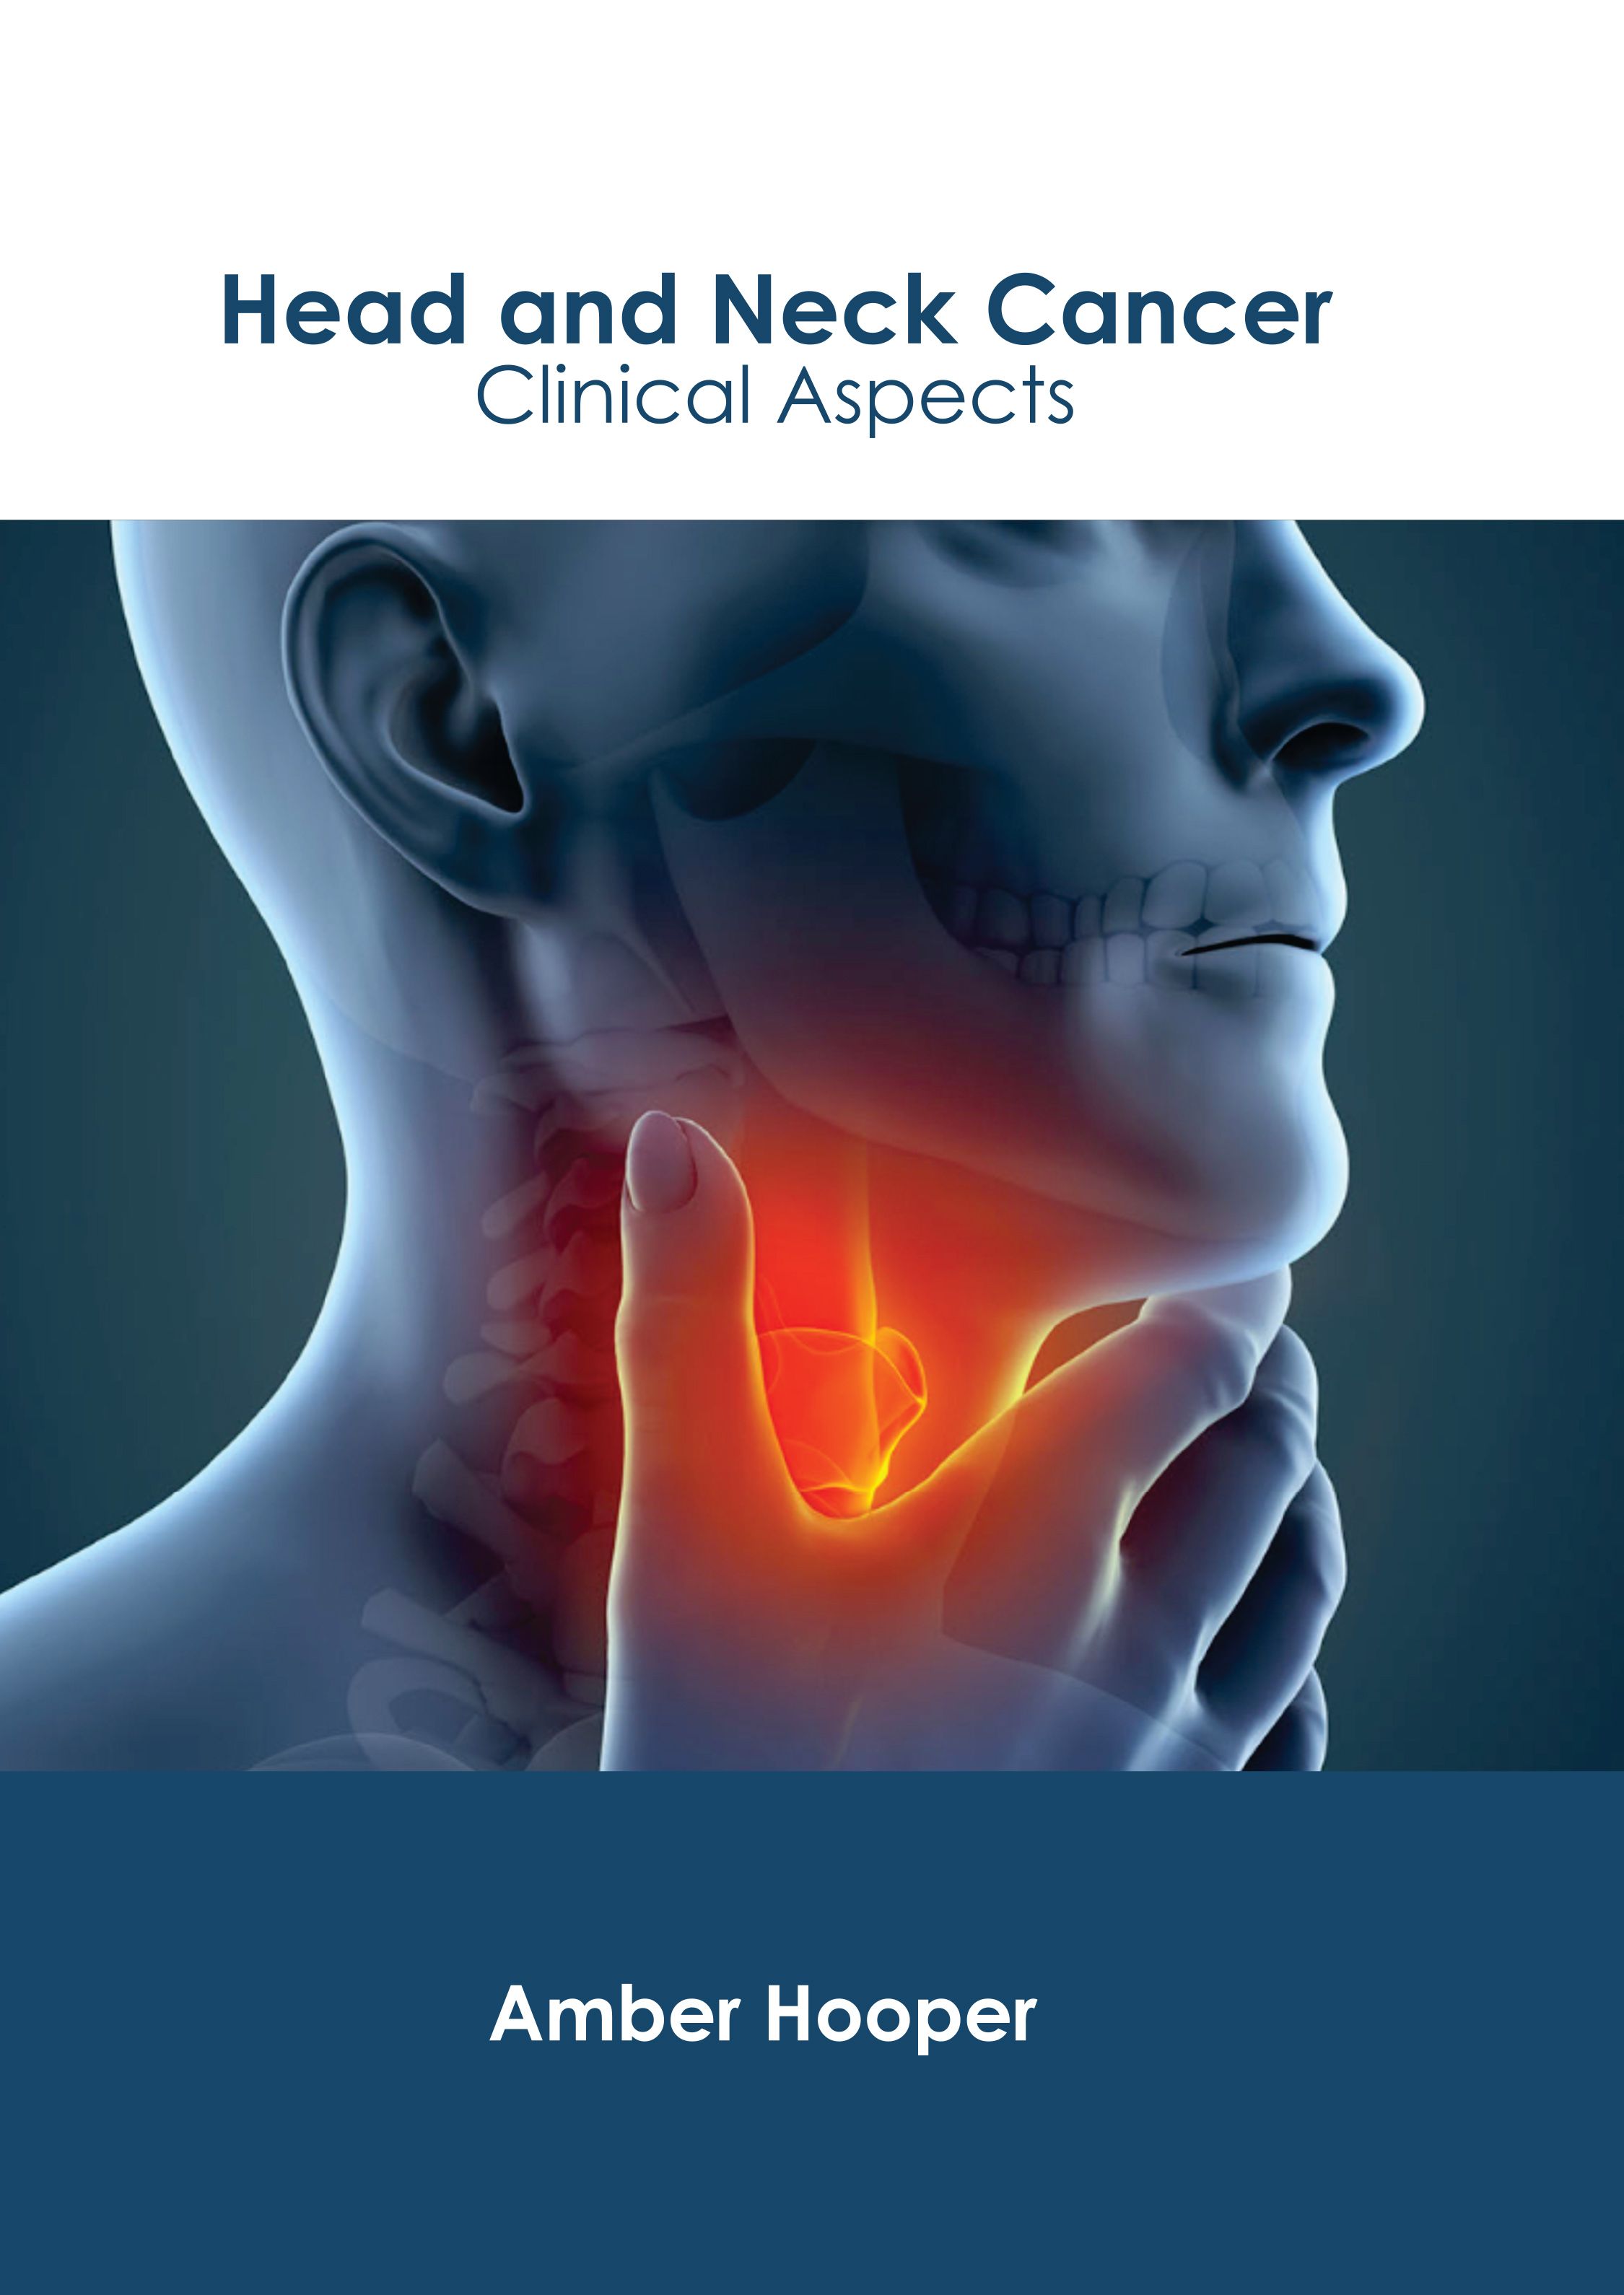 HEAD AND NECK CANCER: CLINICAL ASPECTS